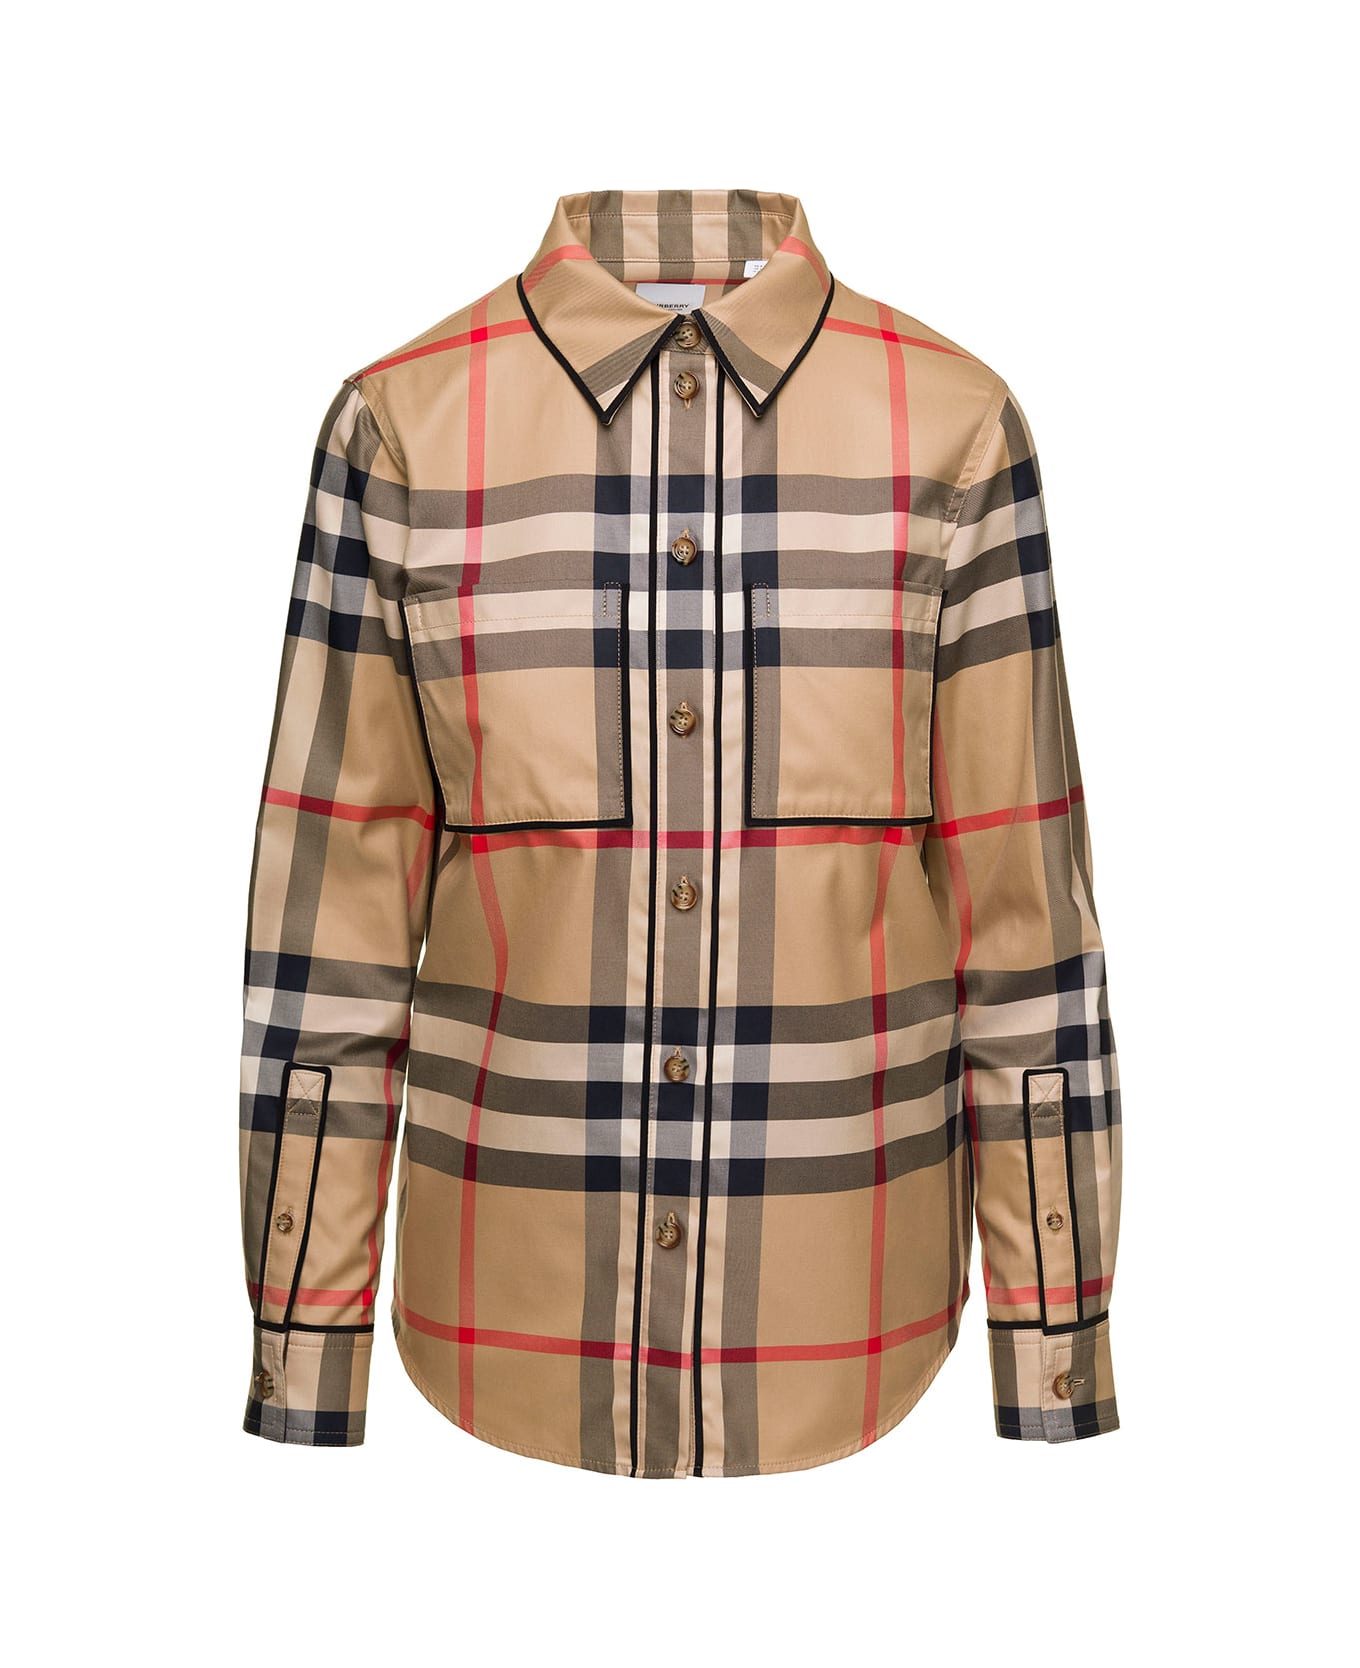 Burberry Beige Shirt With All-over Vintage Chack Motif And Contrasting Trim In Cotton Woman - Beige